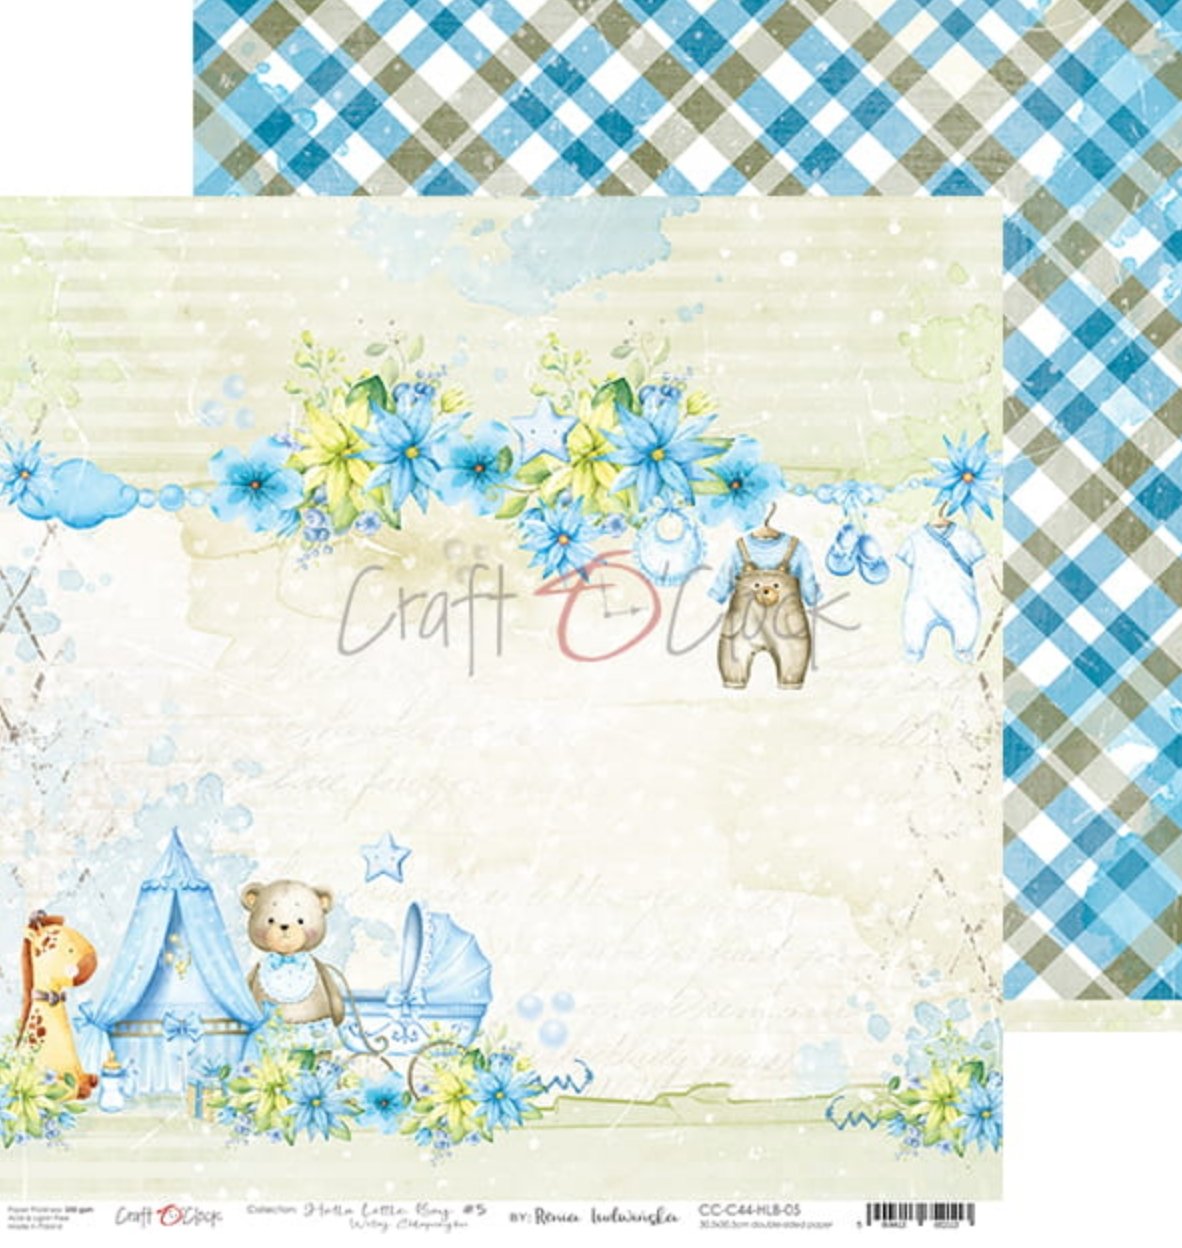 Baby Boy 12 x 12 paperpack  scrapbooking papers - Kinjal Creation